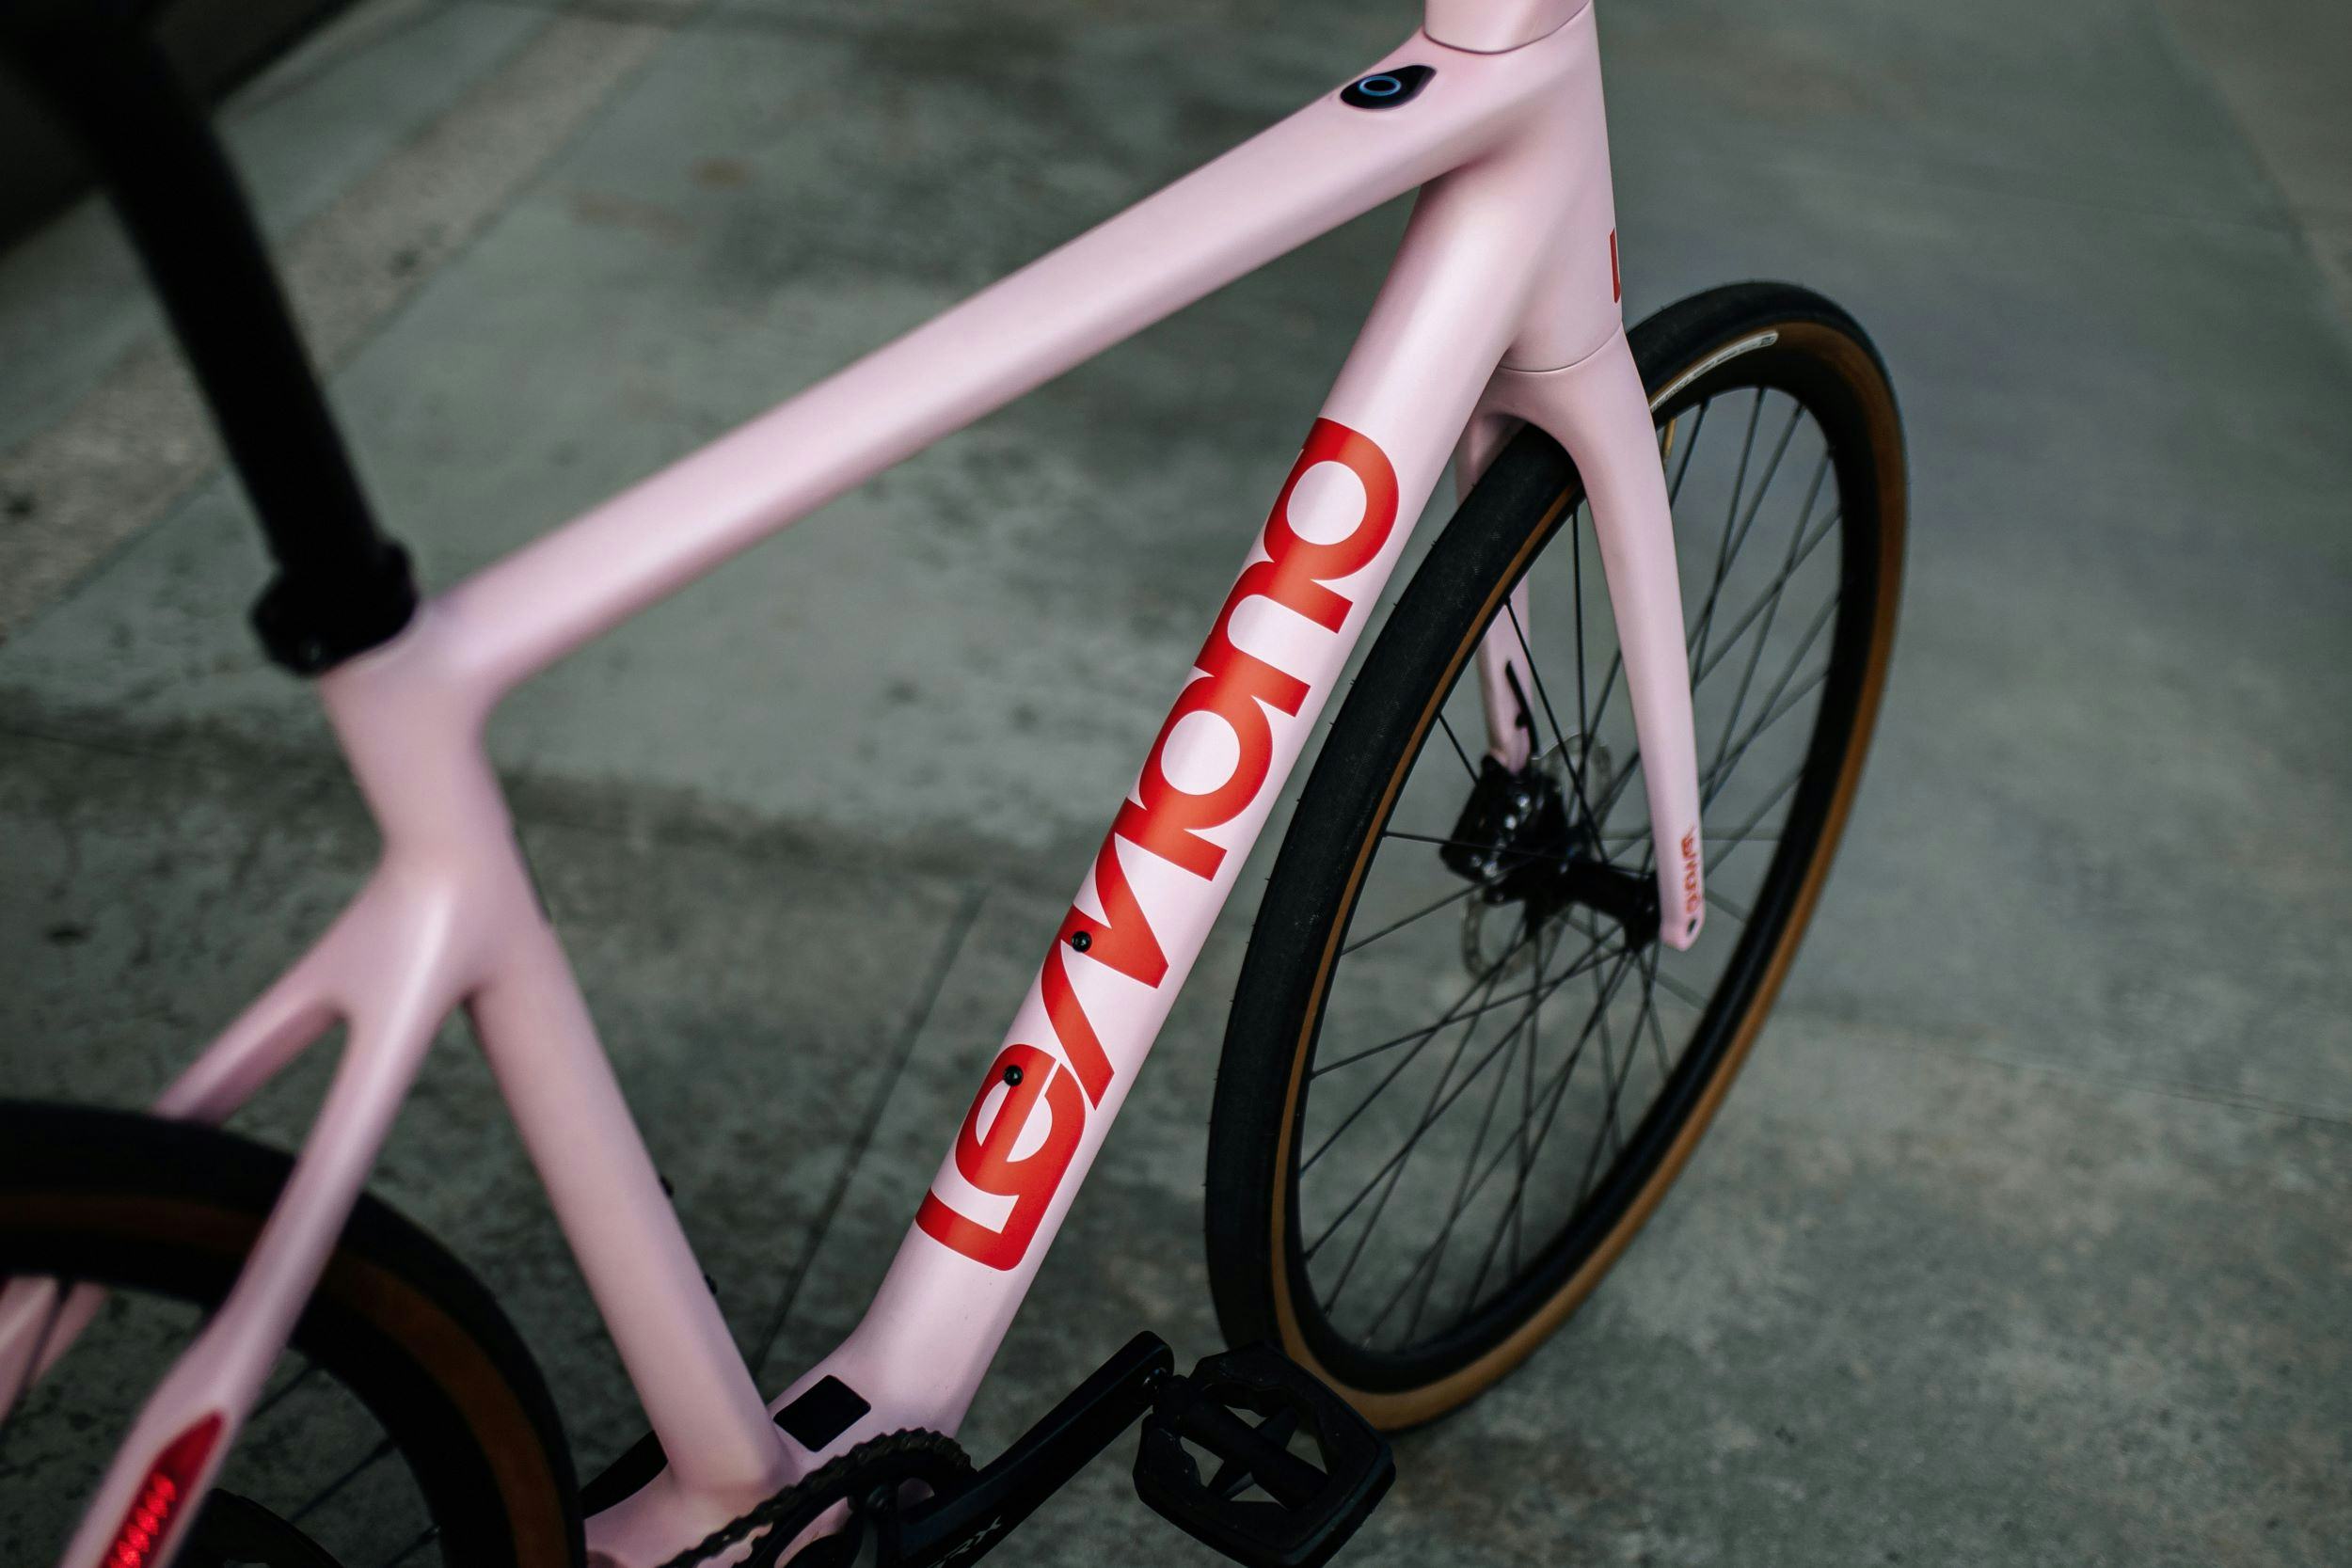 The Prolog, which starts shipping in February 2021, is available in Blanc, Noir, and Rosa colourways. - Photo LeMond 